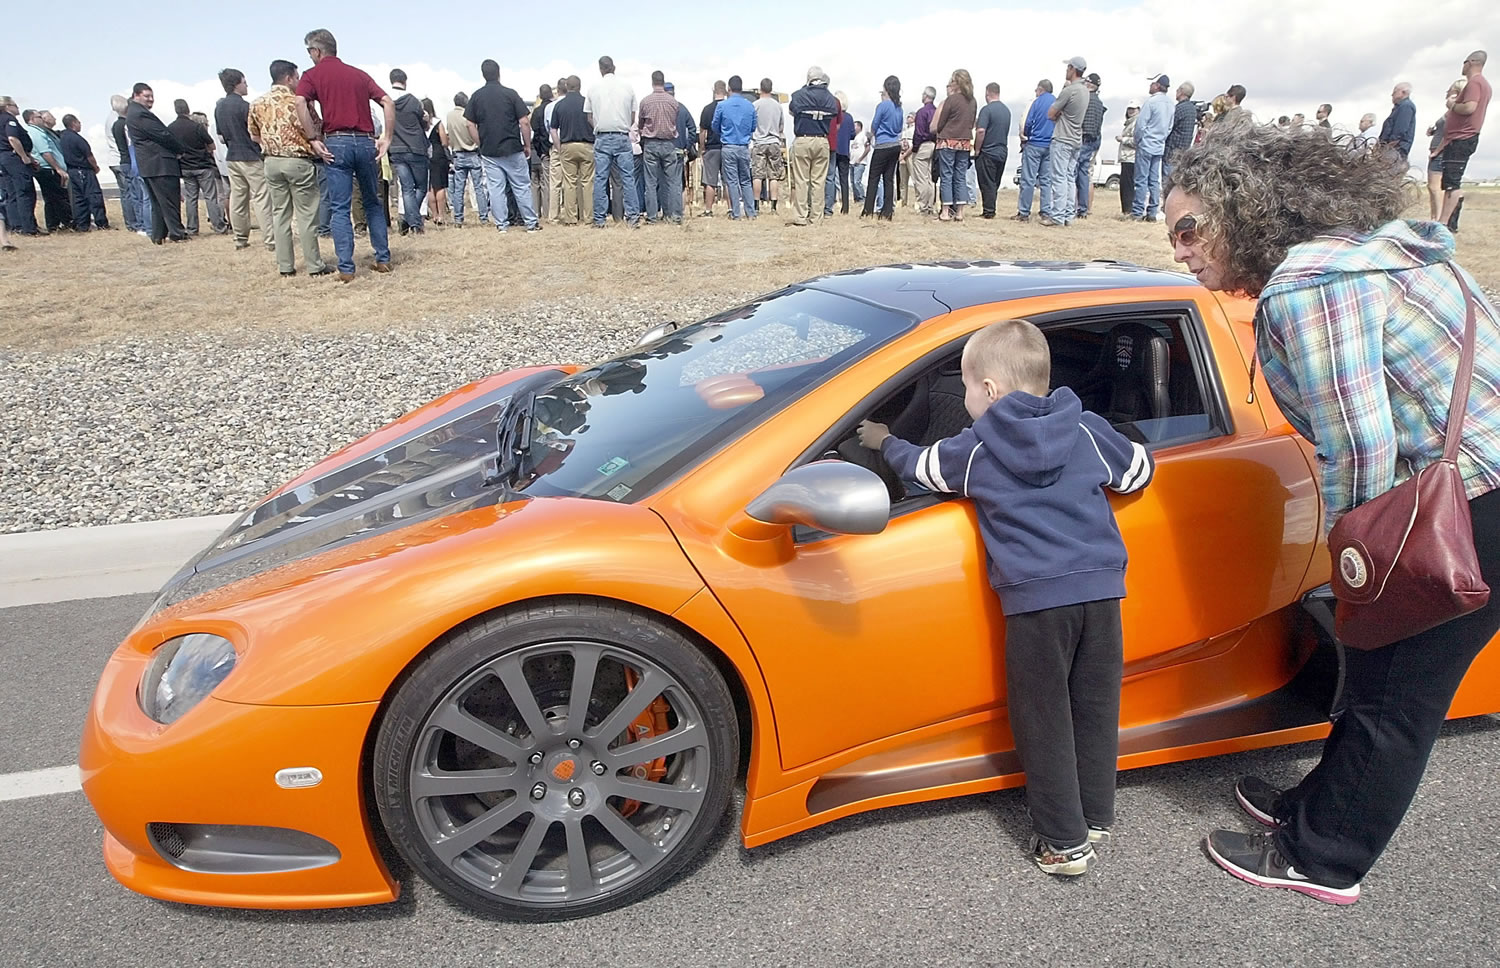 An Ultimate Aero is displayed at the Tuesday groundbreaking event for SSC North America in West Richland.